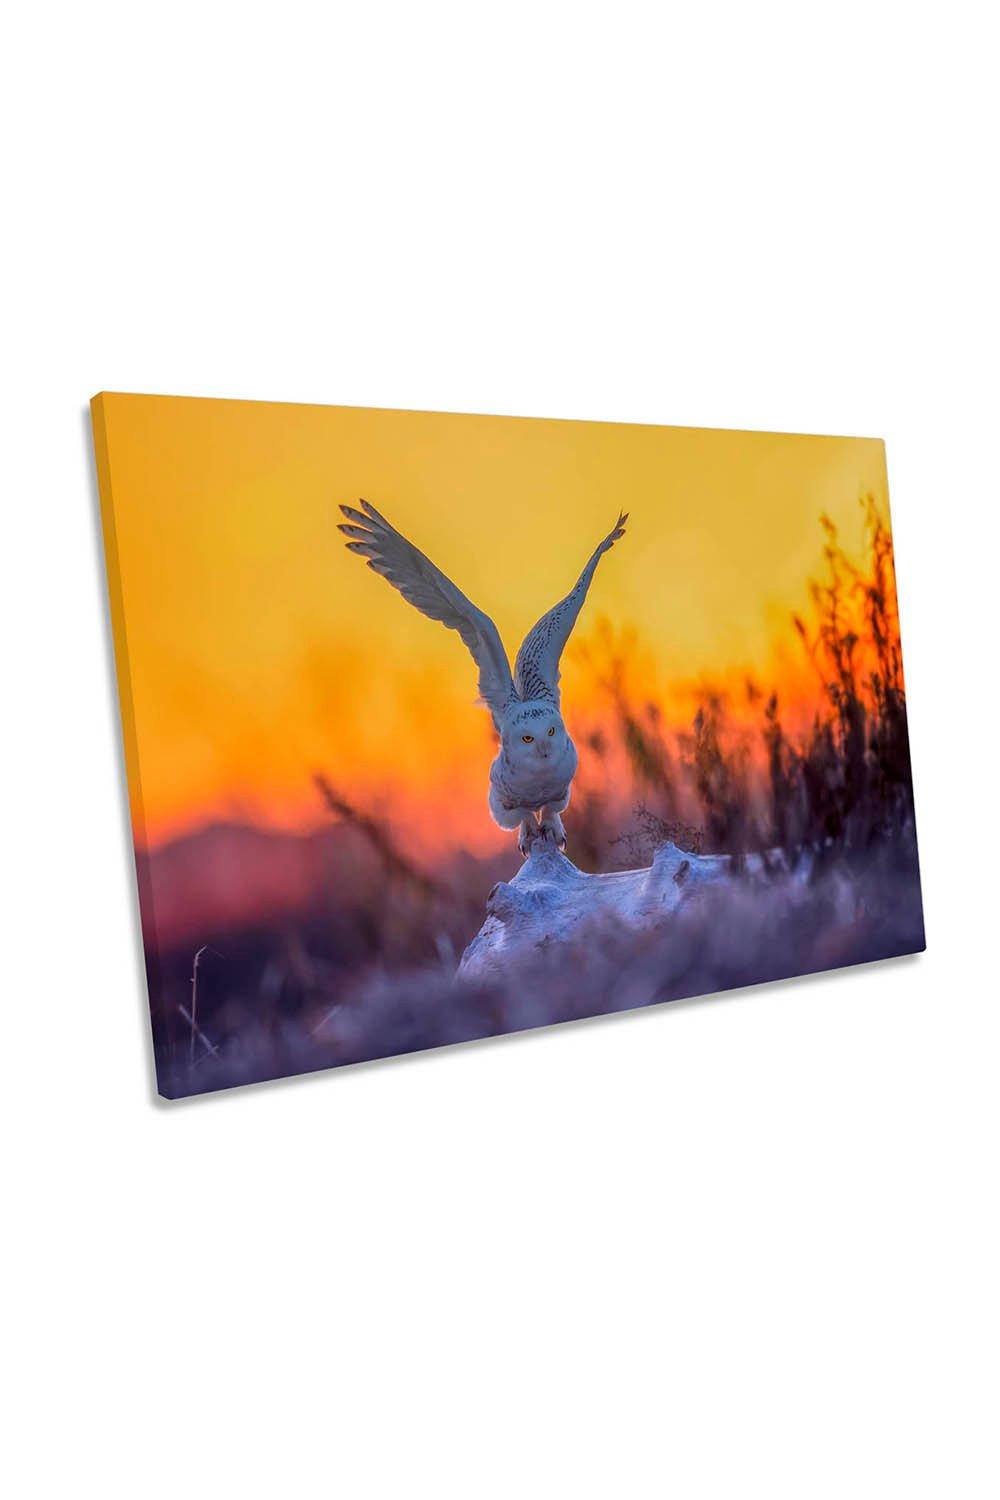 Snowy Owl Taking Off at Sunrise Canvas Wall Art Picture Print